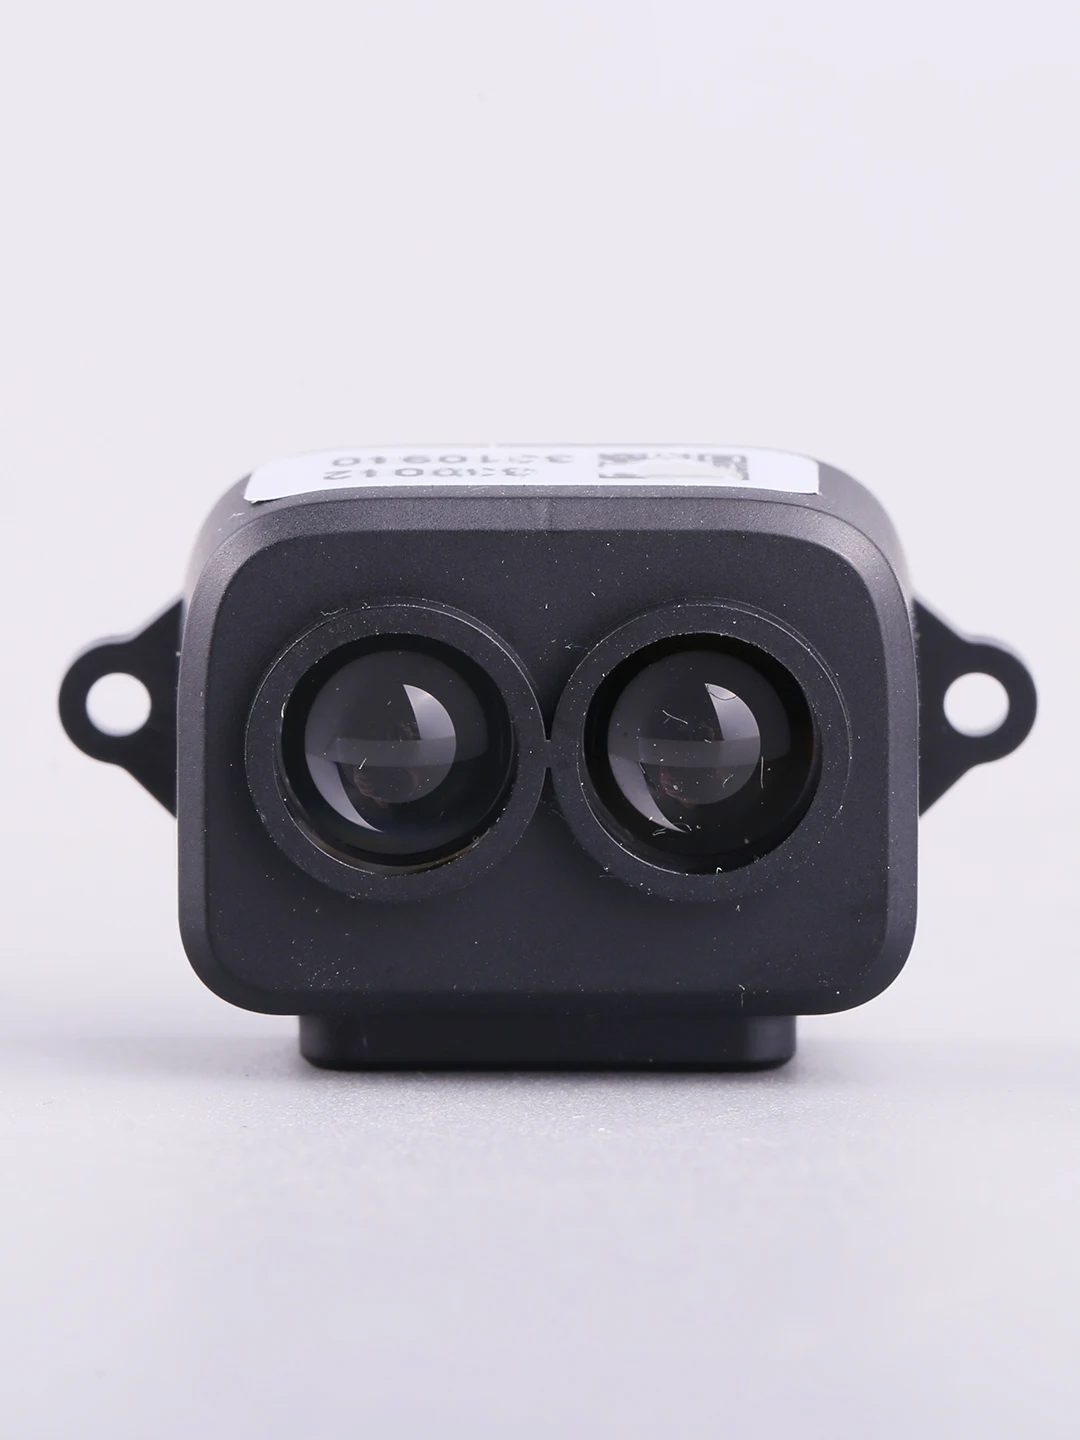 

TF-Luna 8m Detection Small Volume Low Cost Light Weight Obstacle Avoidance Easy To Integrate Laser Distance Measurement